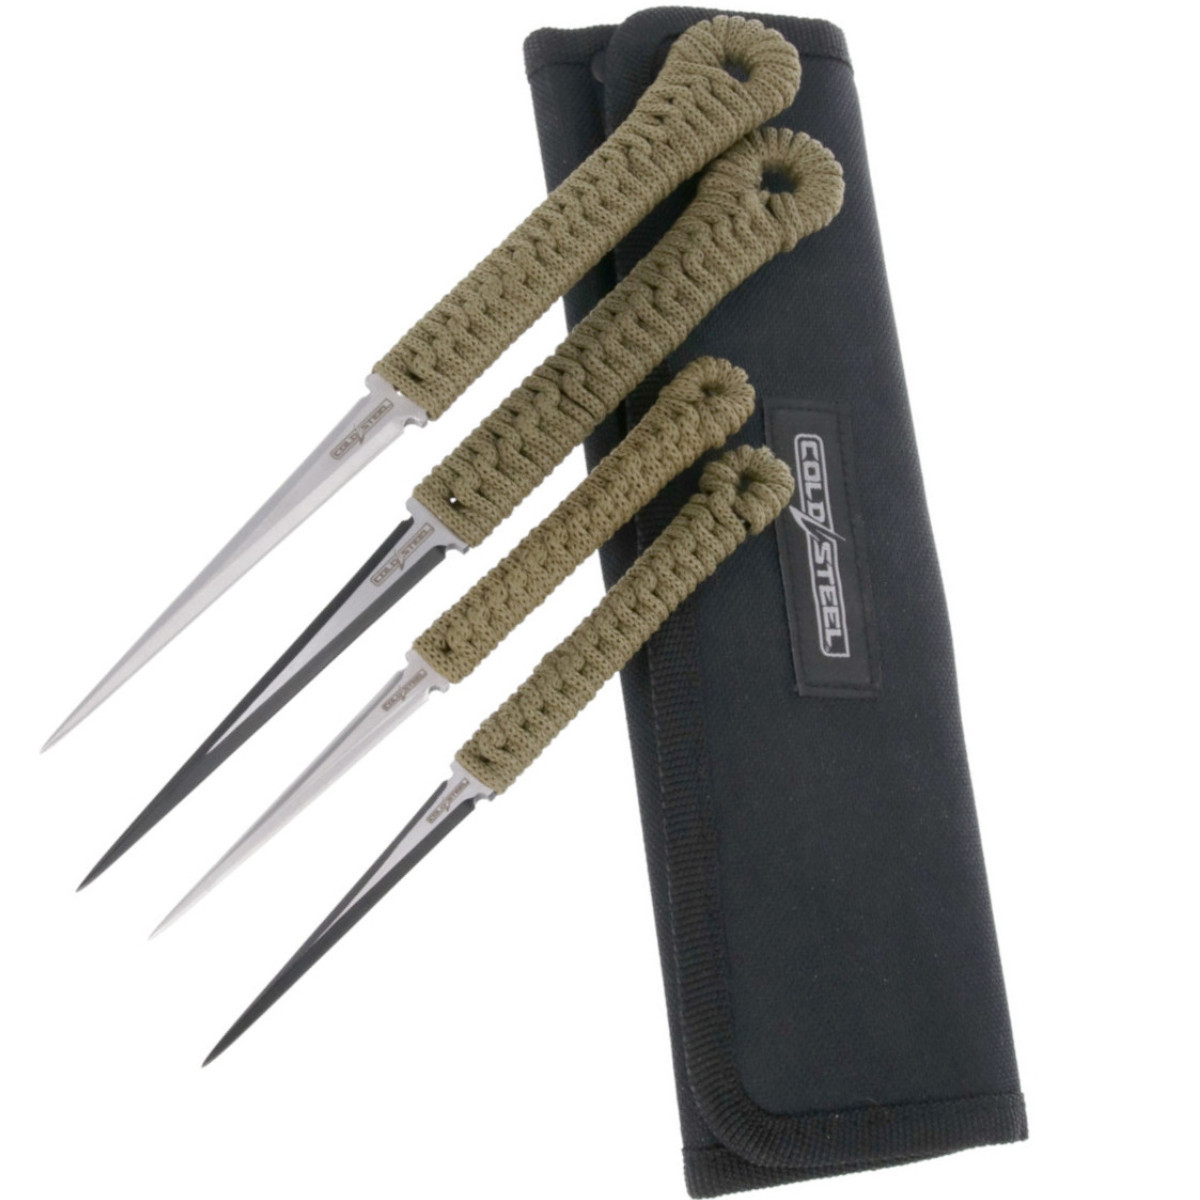 Cold-Steel-THROWING-SPIKES-4-PACK-WITH-POUCH-TH-SPK4PK